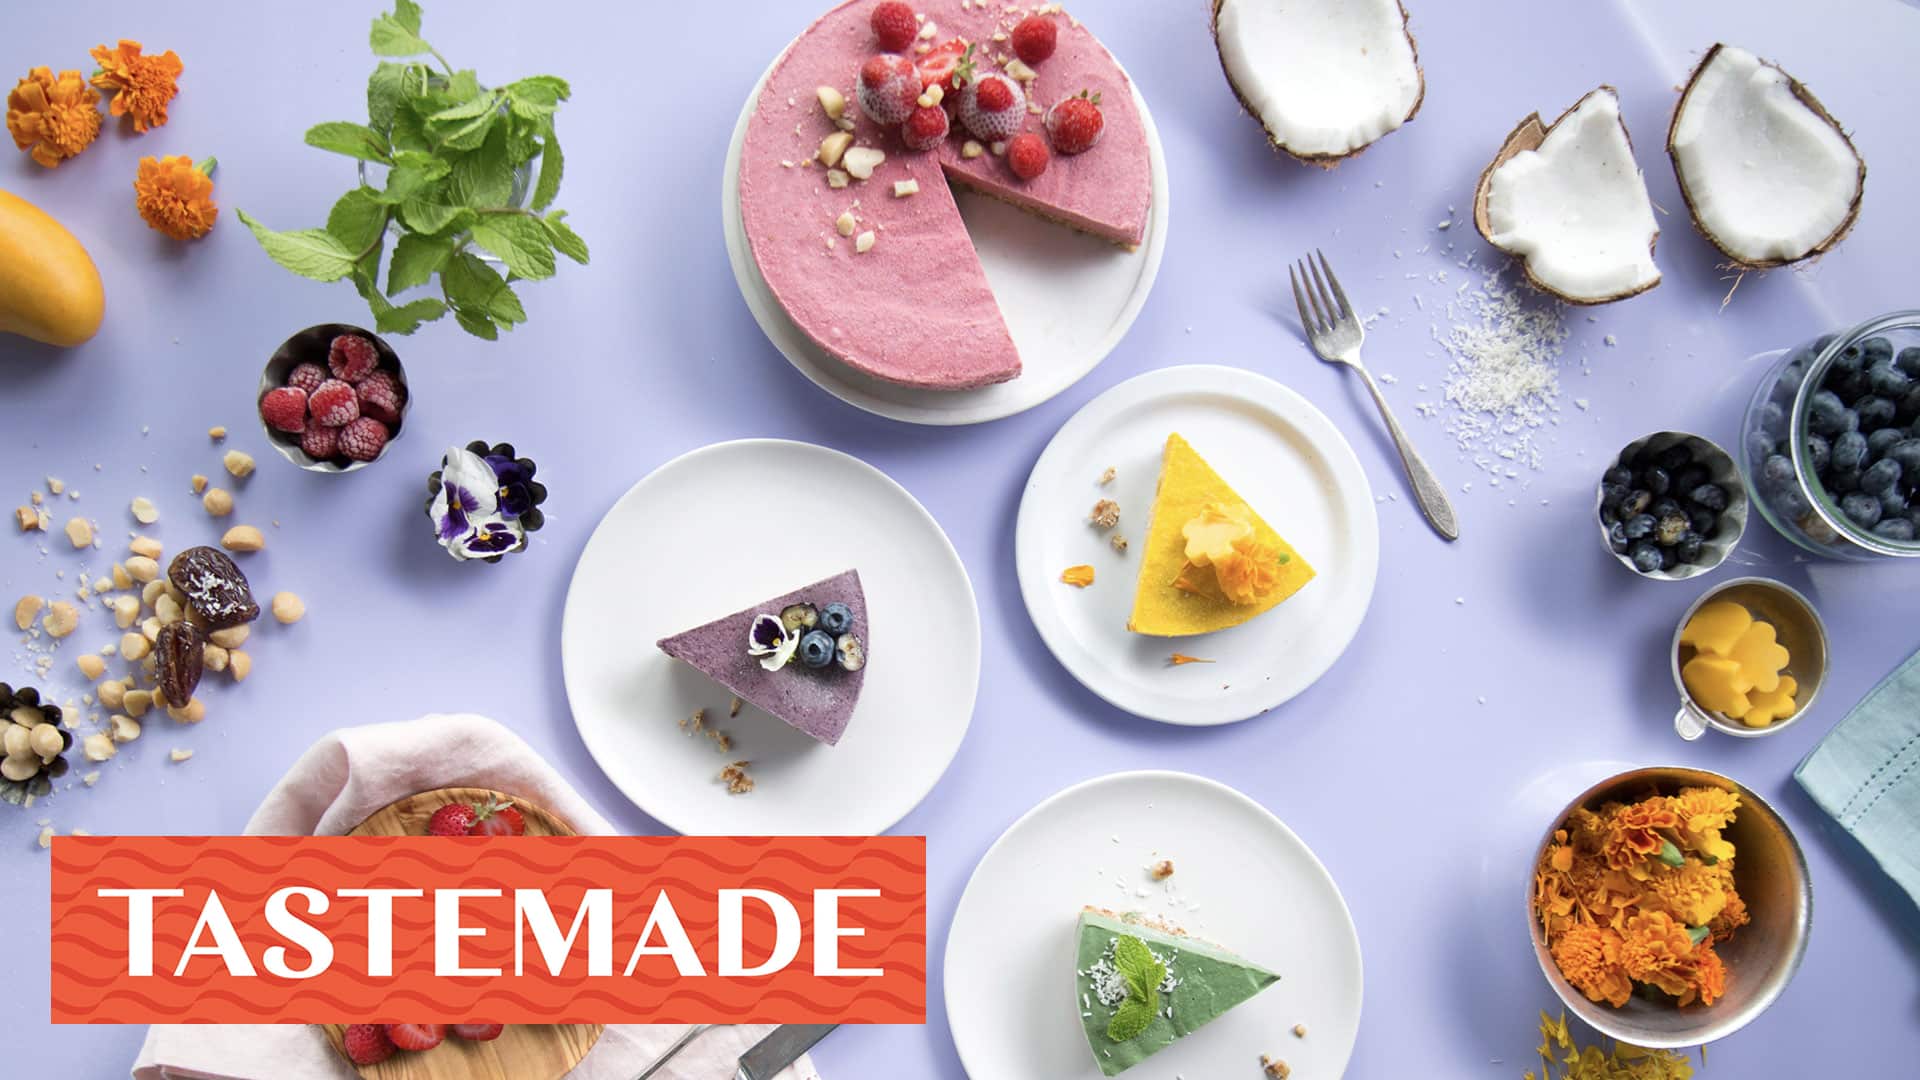 Walmart Partners With Tastemade for Shoppable Streaming With New ‘Struggle Meals’ Episodes